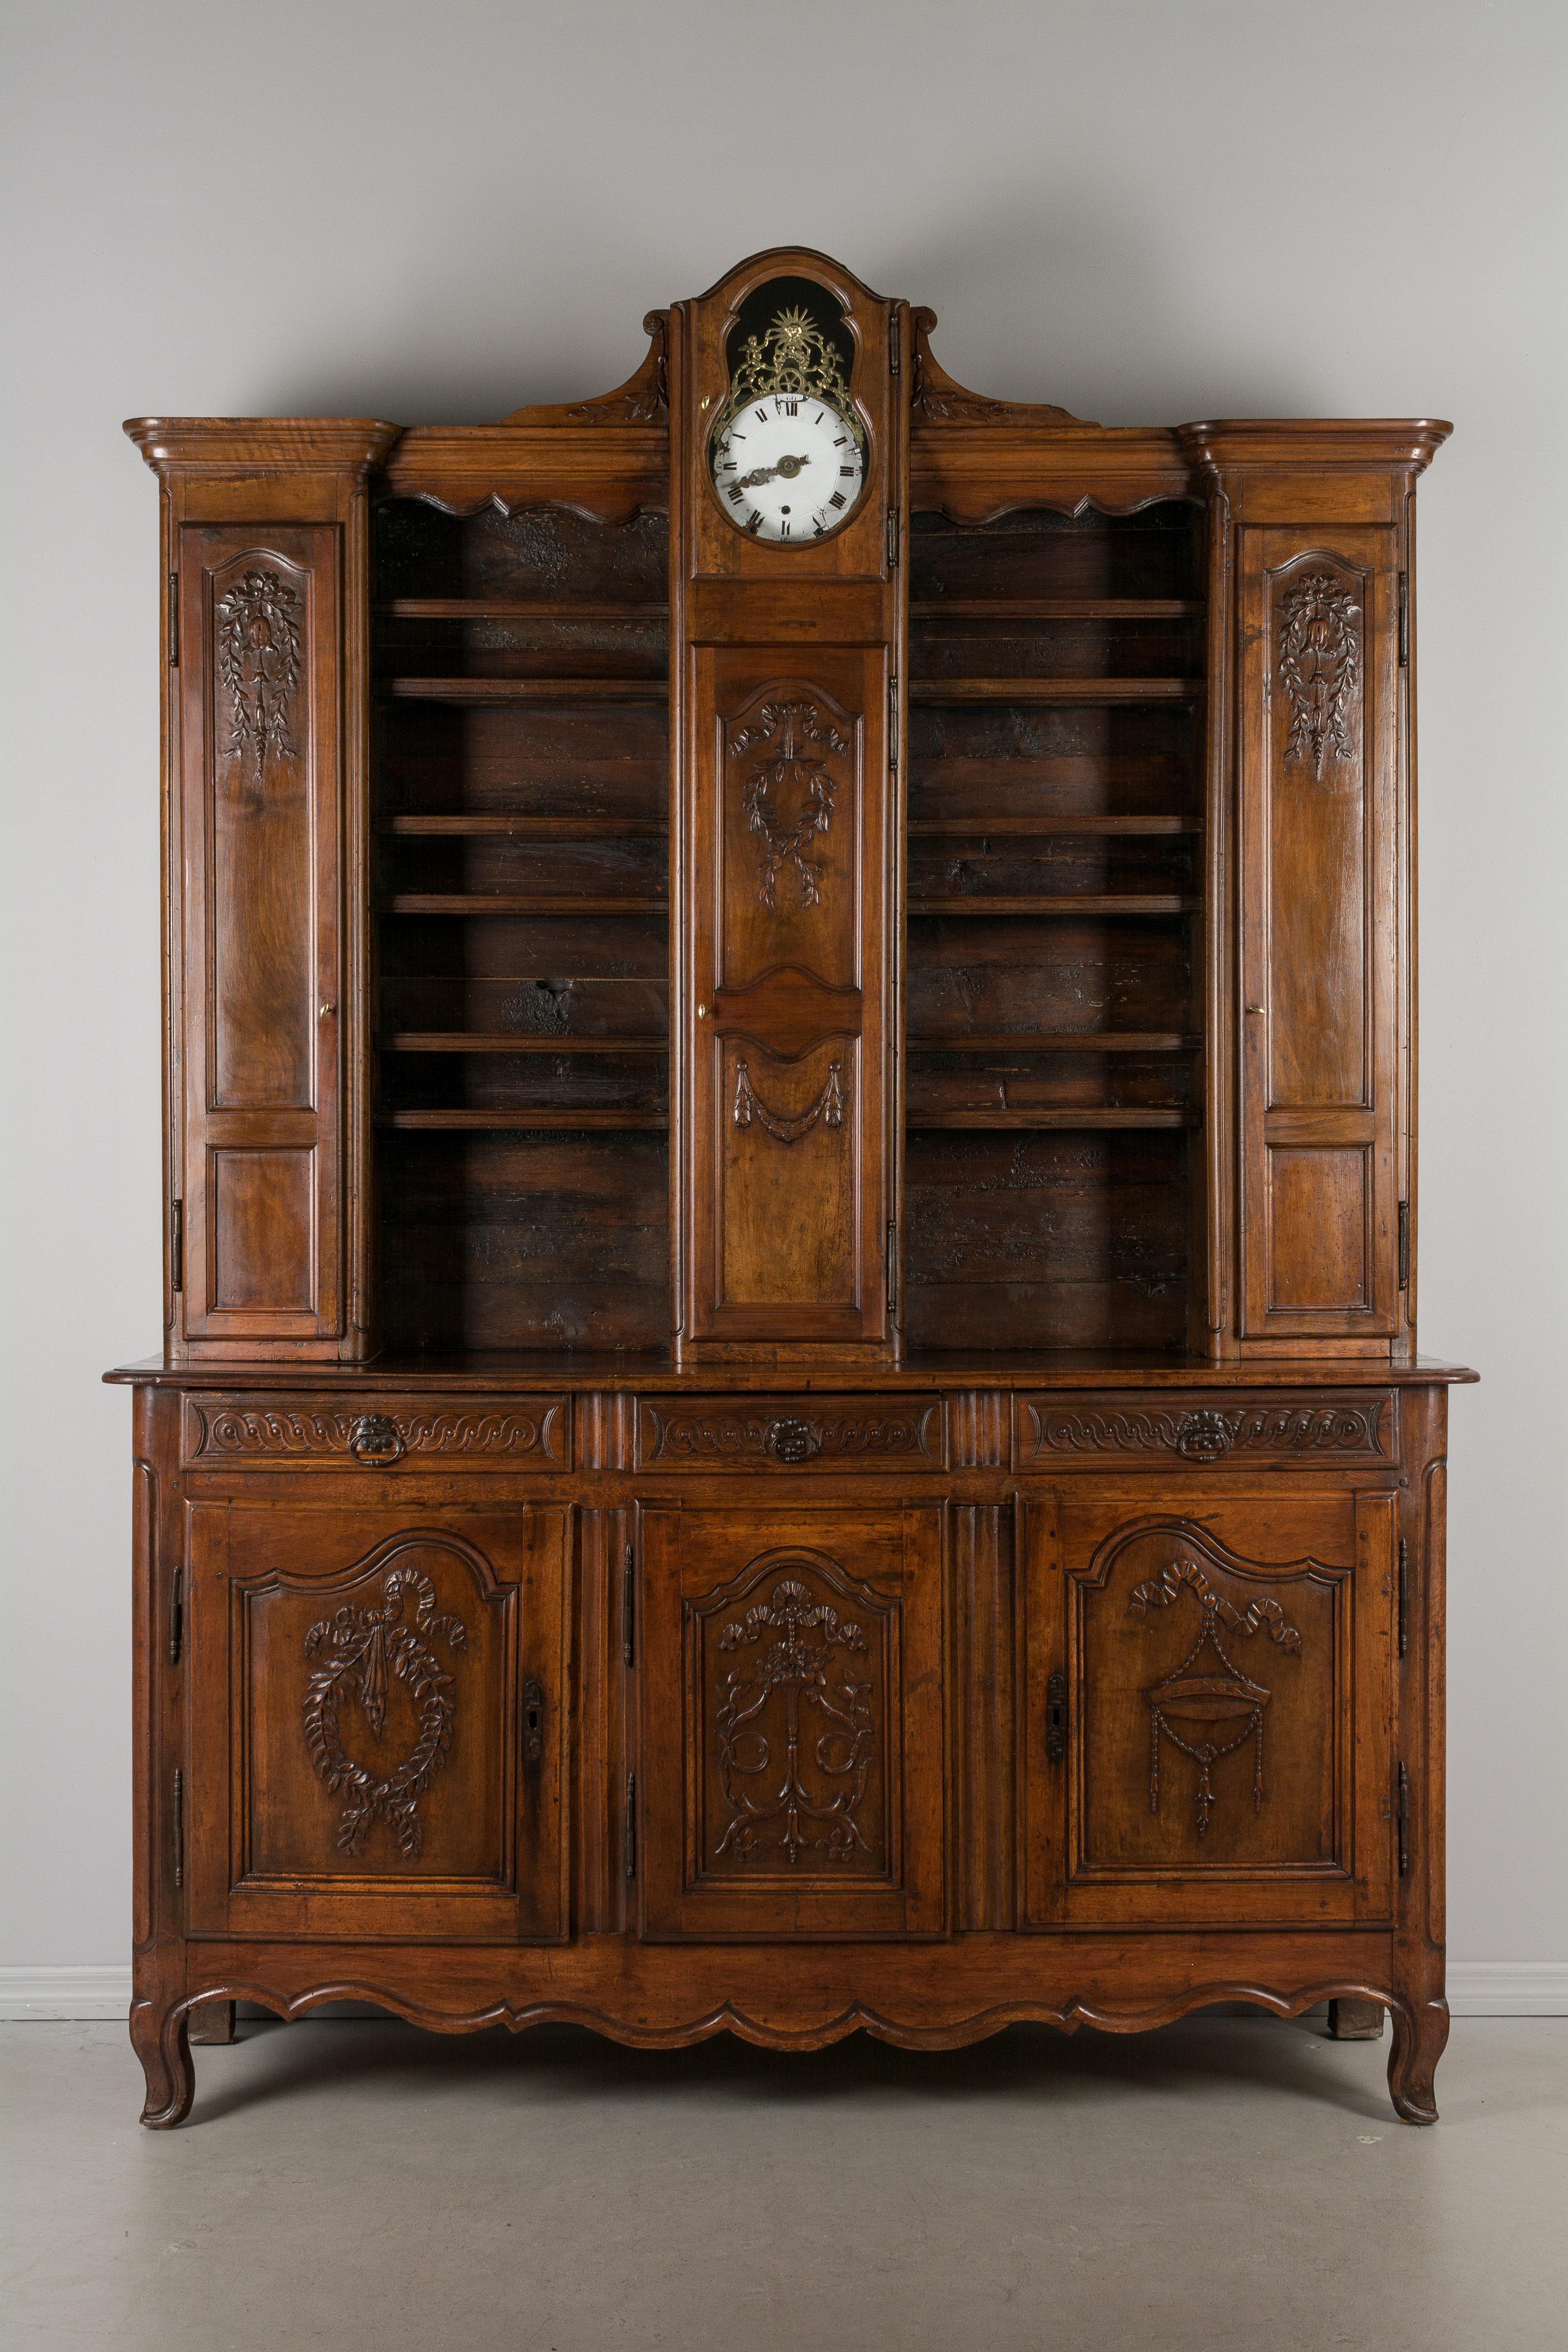 A late 18th century country French buffet vaisselier from Burgundy made of solid walnut beautiful hand carved decoration of flowers, ribbons and wreaths. The hutch has the original clock with enamel face and cast brass surround and is in working